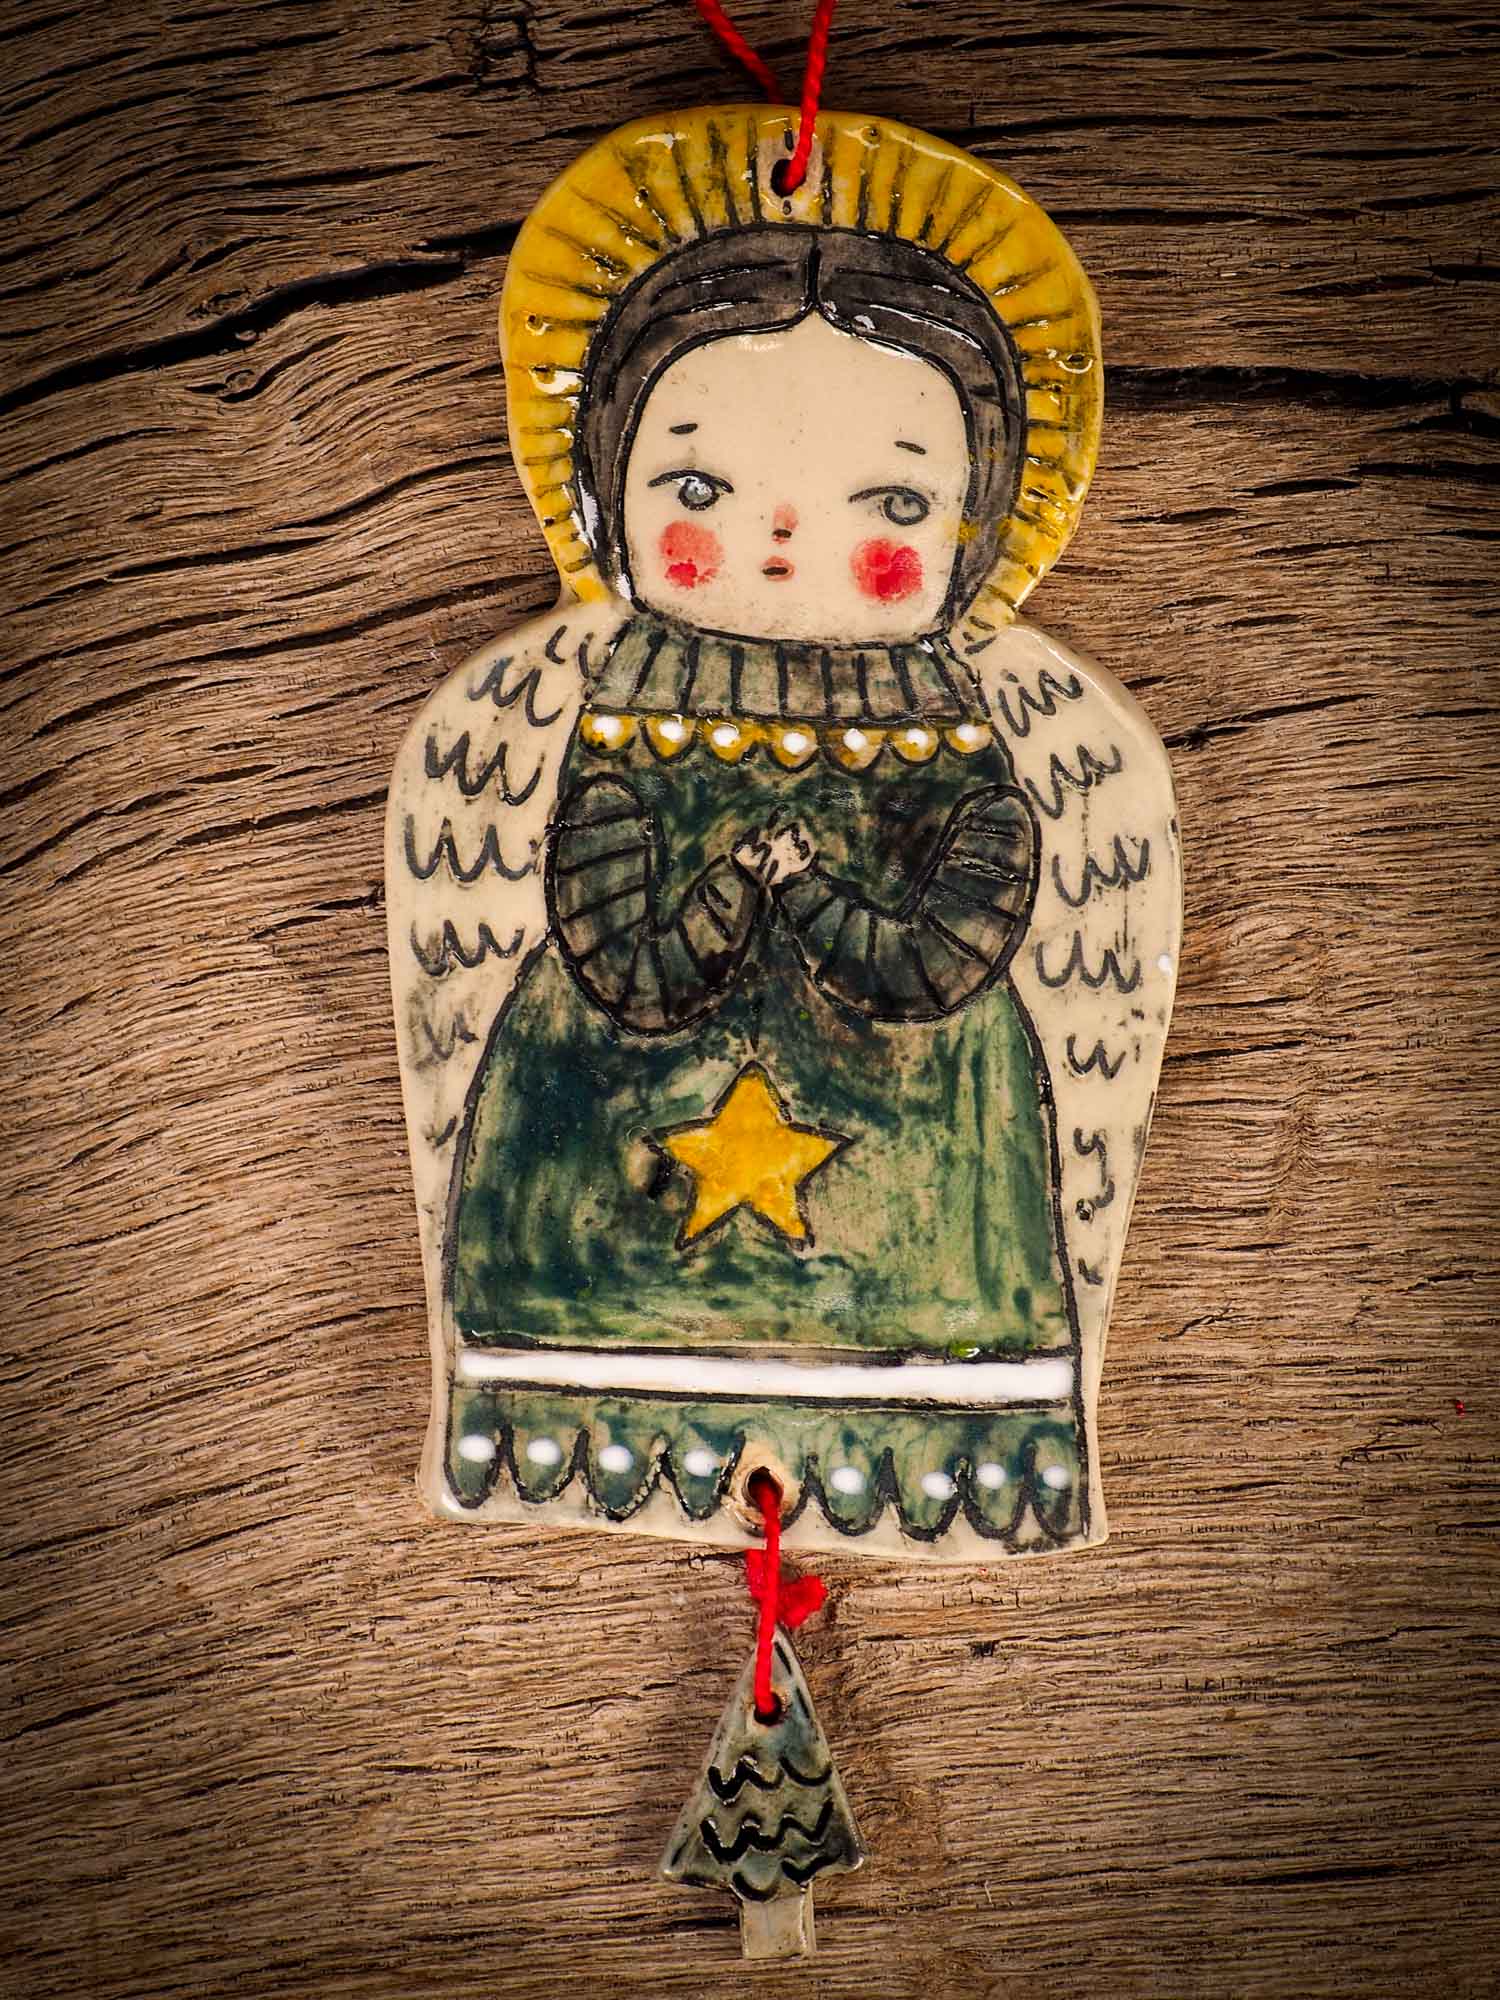 An original Christmas Holiday tree round glazed ceramic ornament handmade by Idania Salcido, the artist behind Danita Art. Glazed carved sgraffito stoneware, hand painted and decorated, it is illustrated by hand with snowmen, Christmas trees, Santa Claus, angels and snow balls and winter themes.